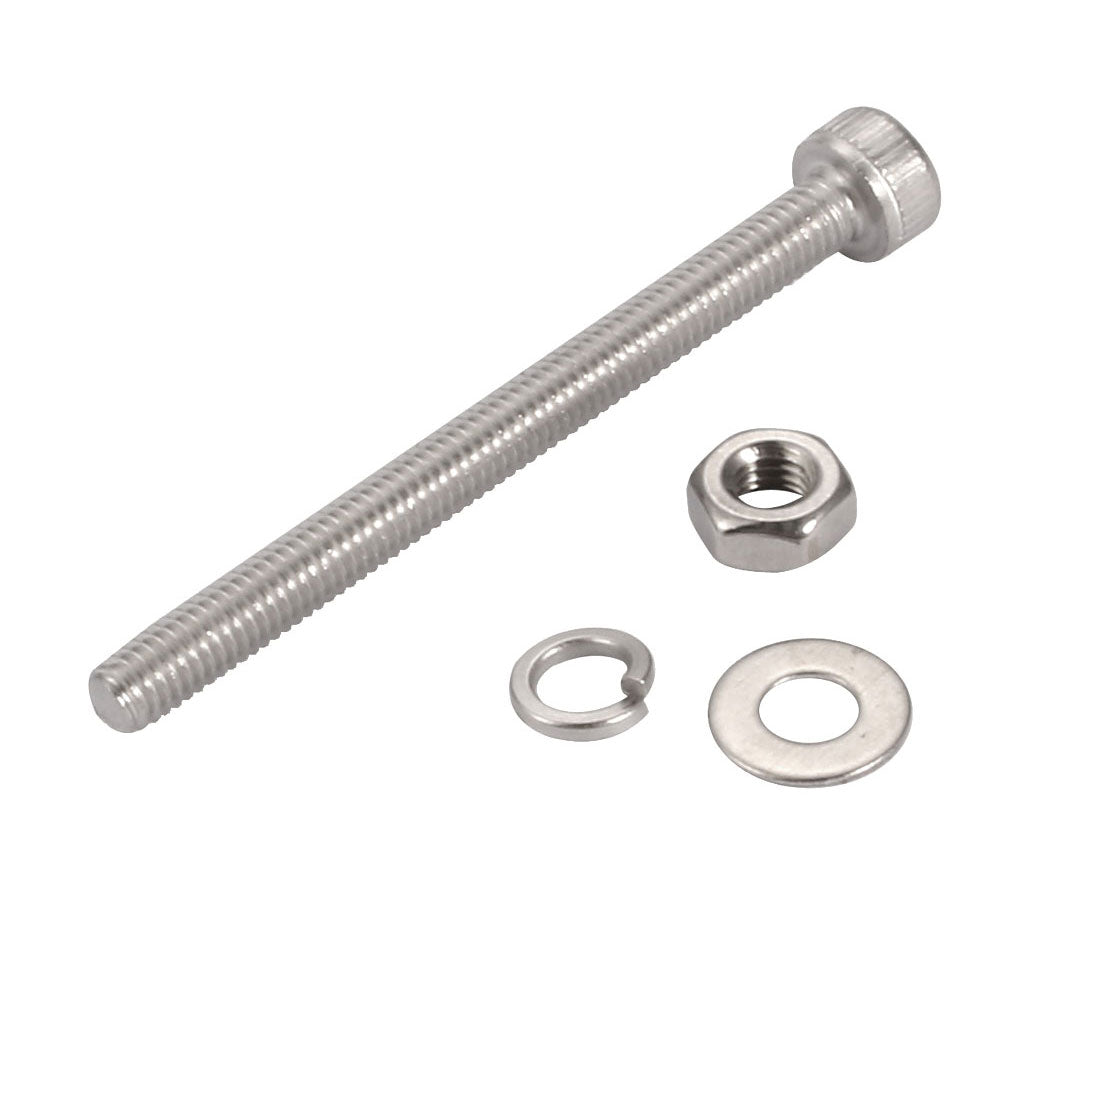 uxcell Uxcell 20Pcs M3x40mm 304 Stainless Steel Knurled Hex Socket Head Bolt Nut Set w Washer